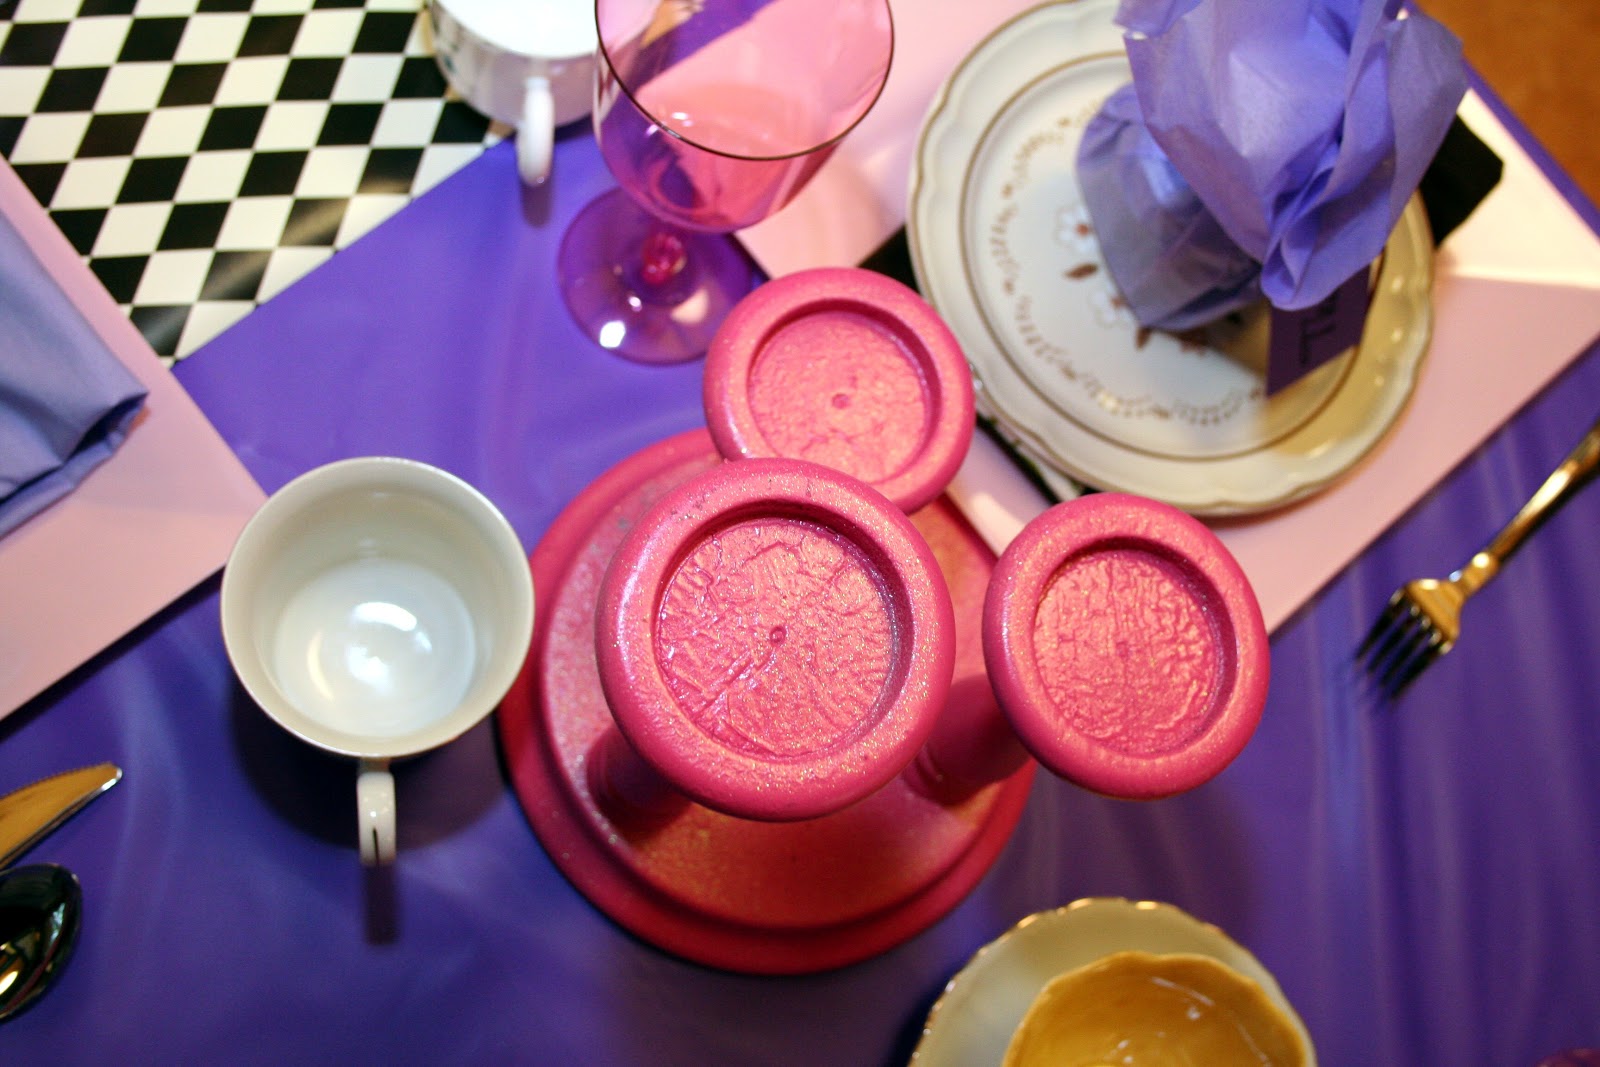 A Busy Mom's Blog: Mad Hatter Tea Party Decorations DIY